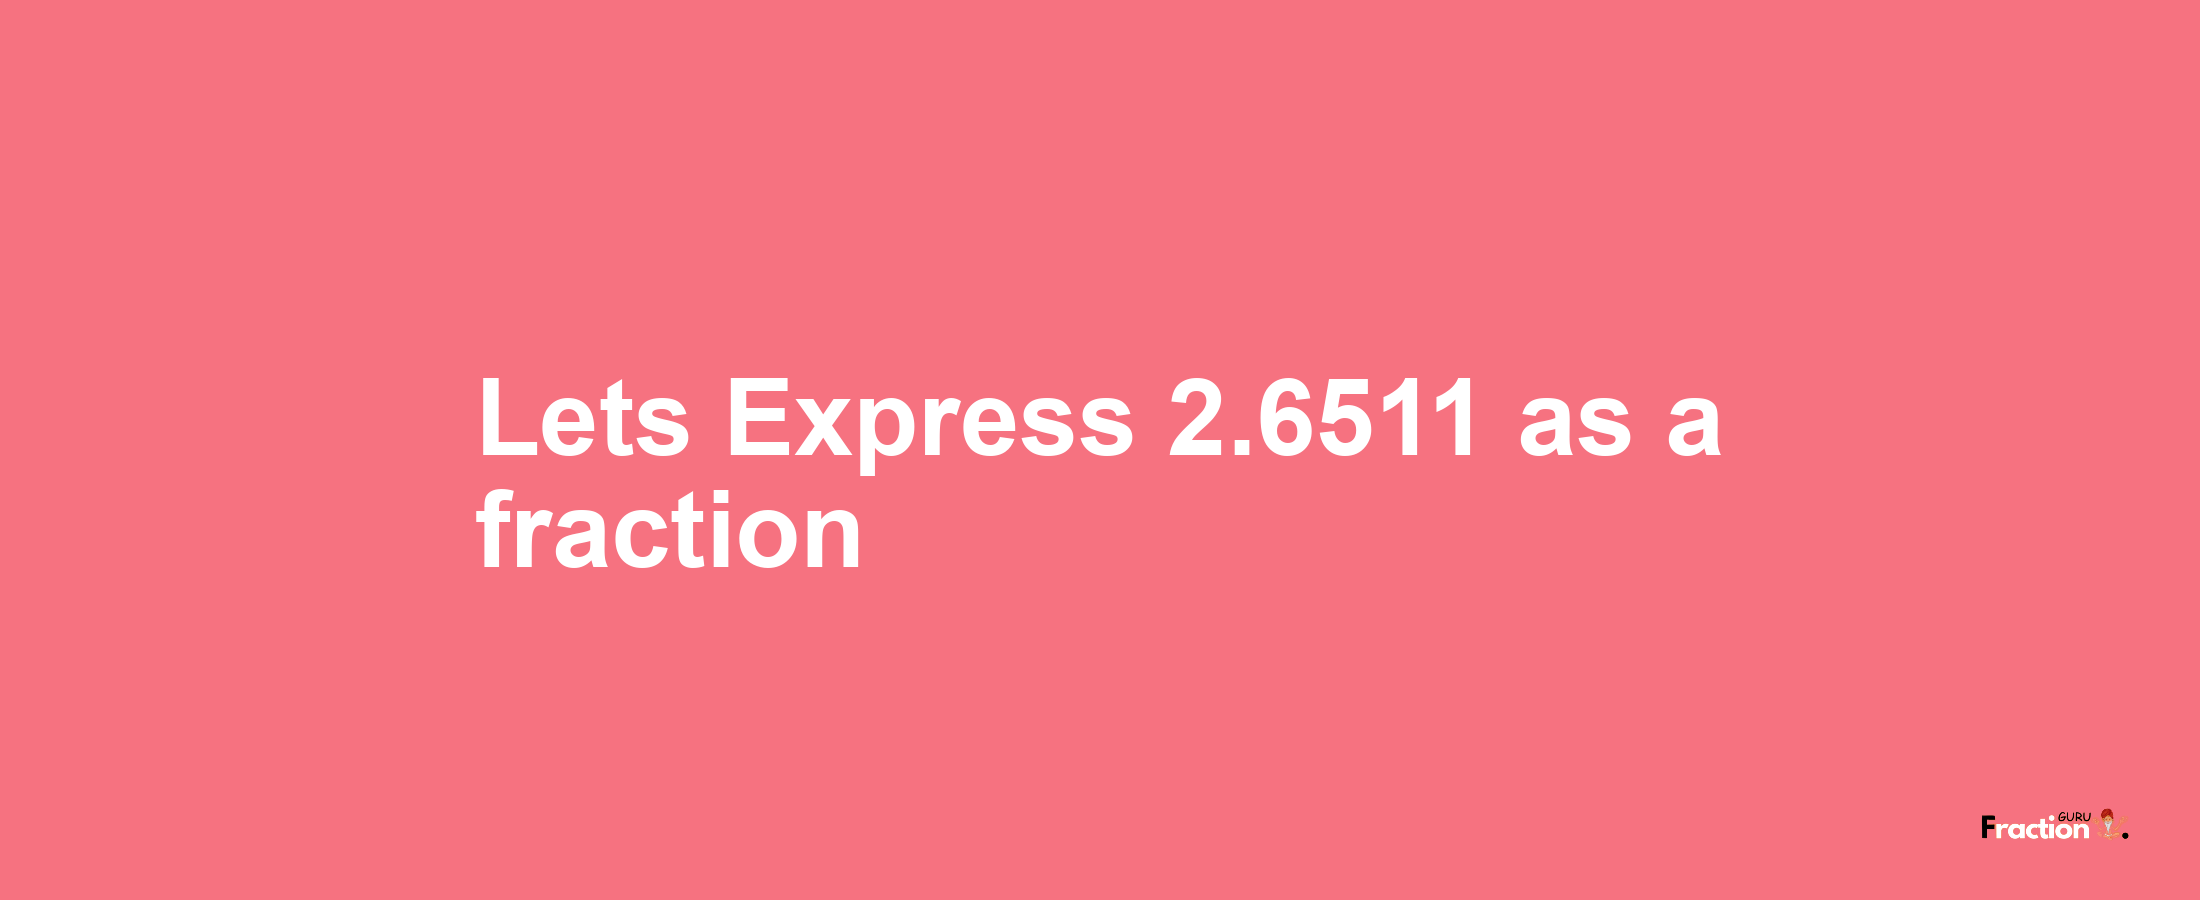 Lets Express 2.6511 as afraction